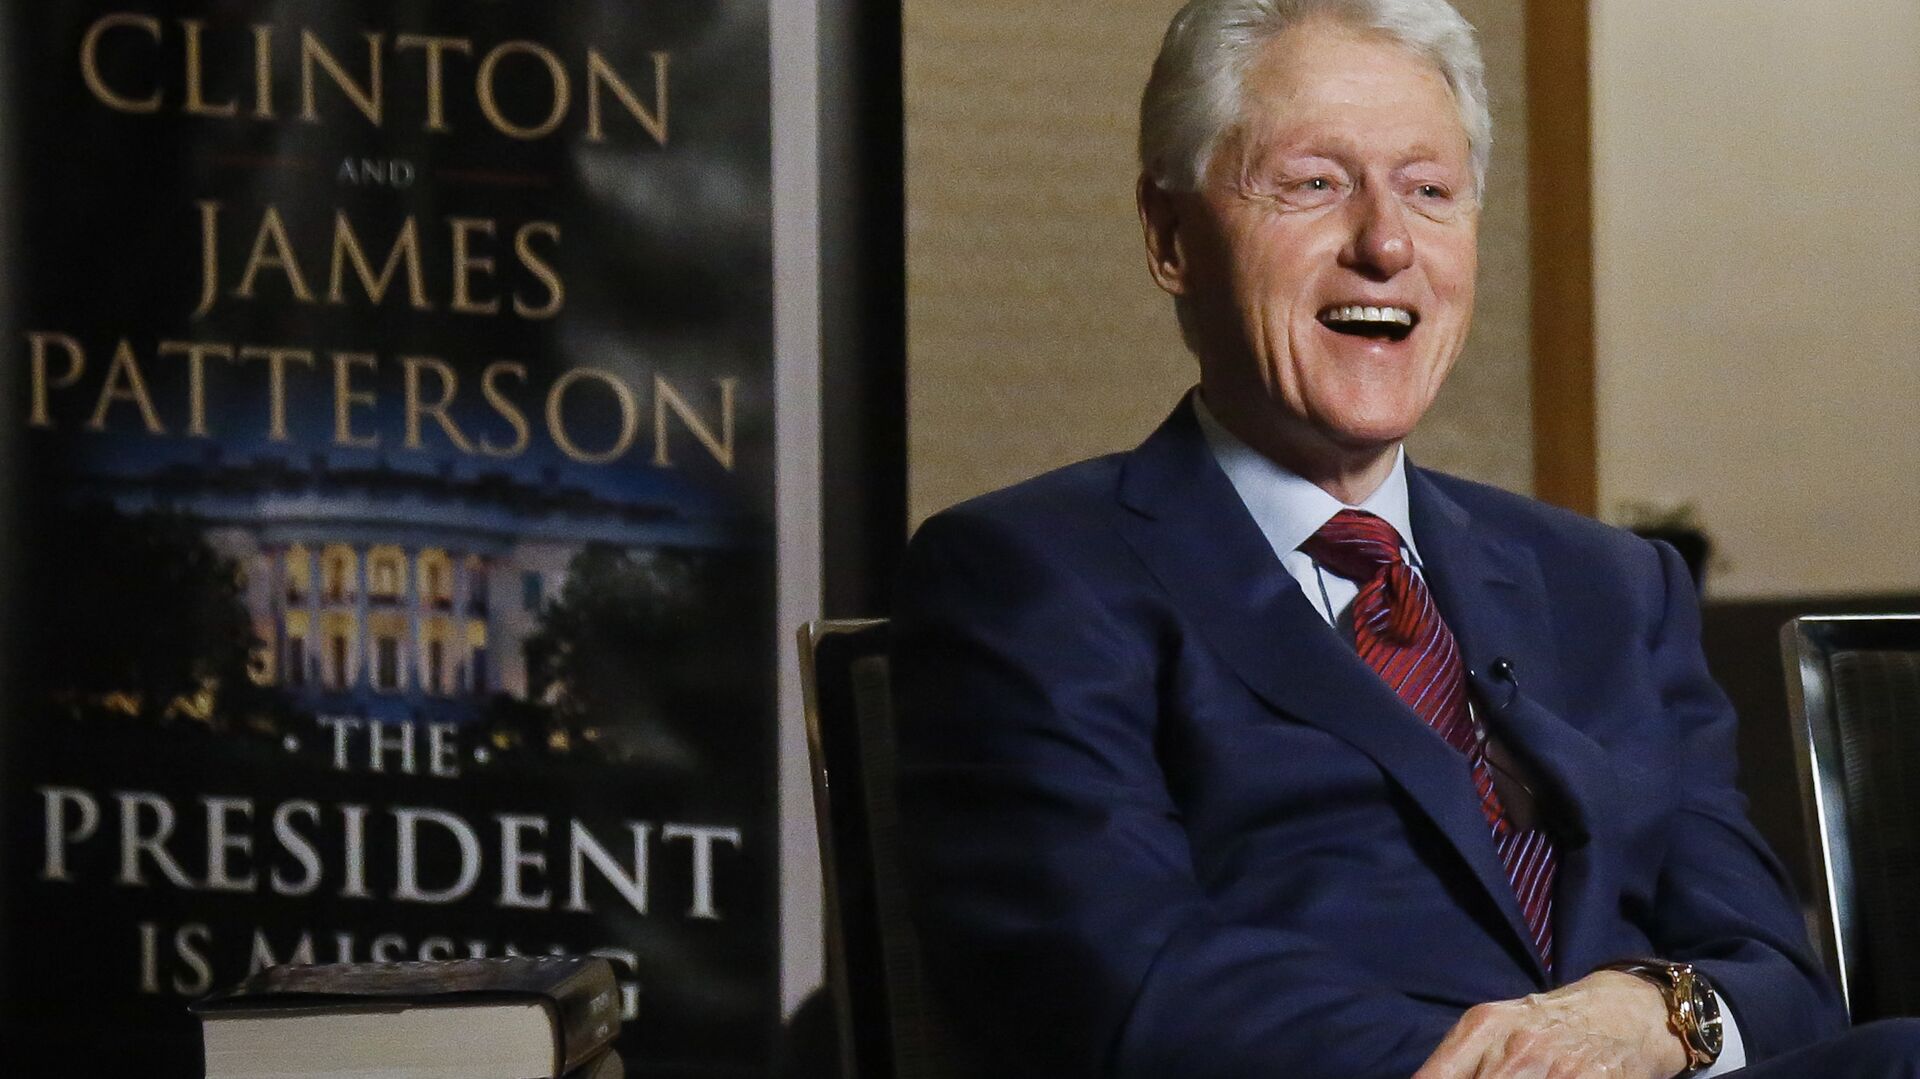 In this Monday, 21 May 2018 photo, former President Bill Clinton speaks during an interview about a novel he wrote with James Patterson, The President is Missing, in New York. - Sputnik International, 1920, 03.09.2021